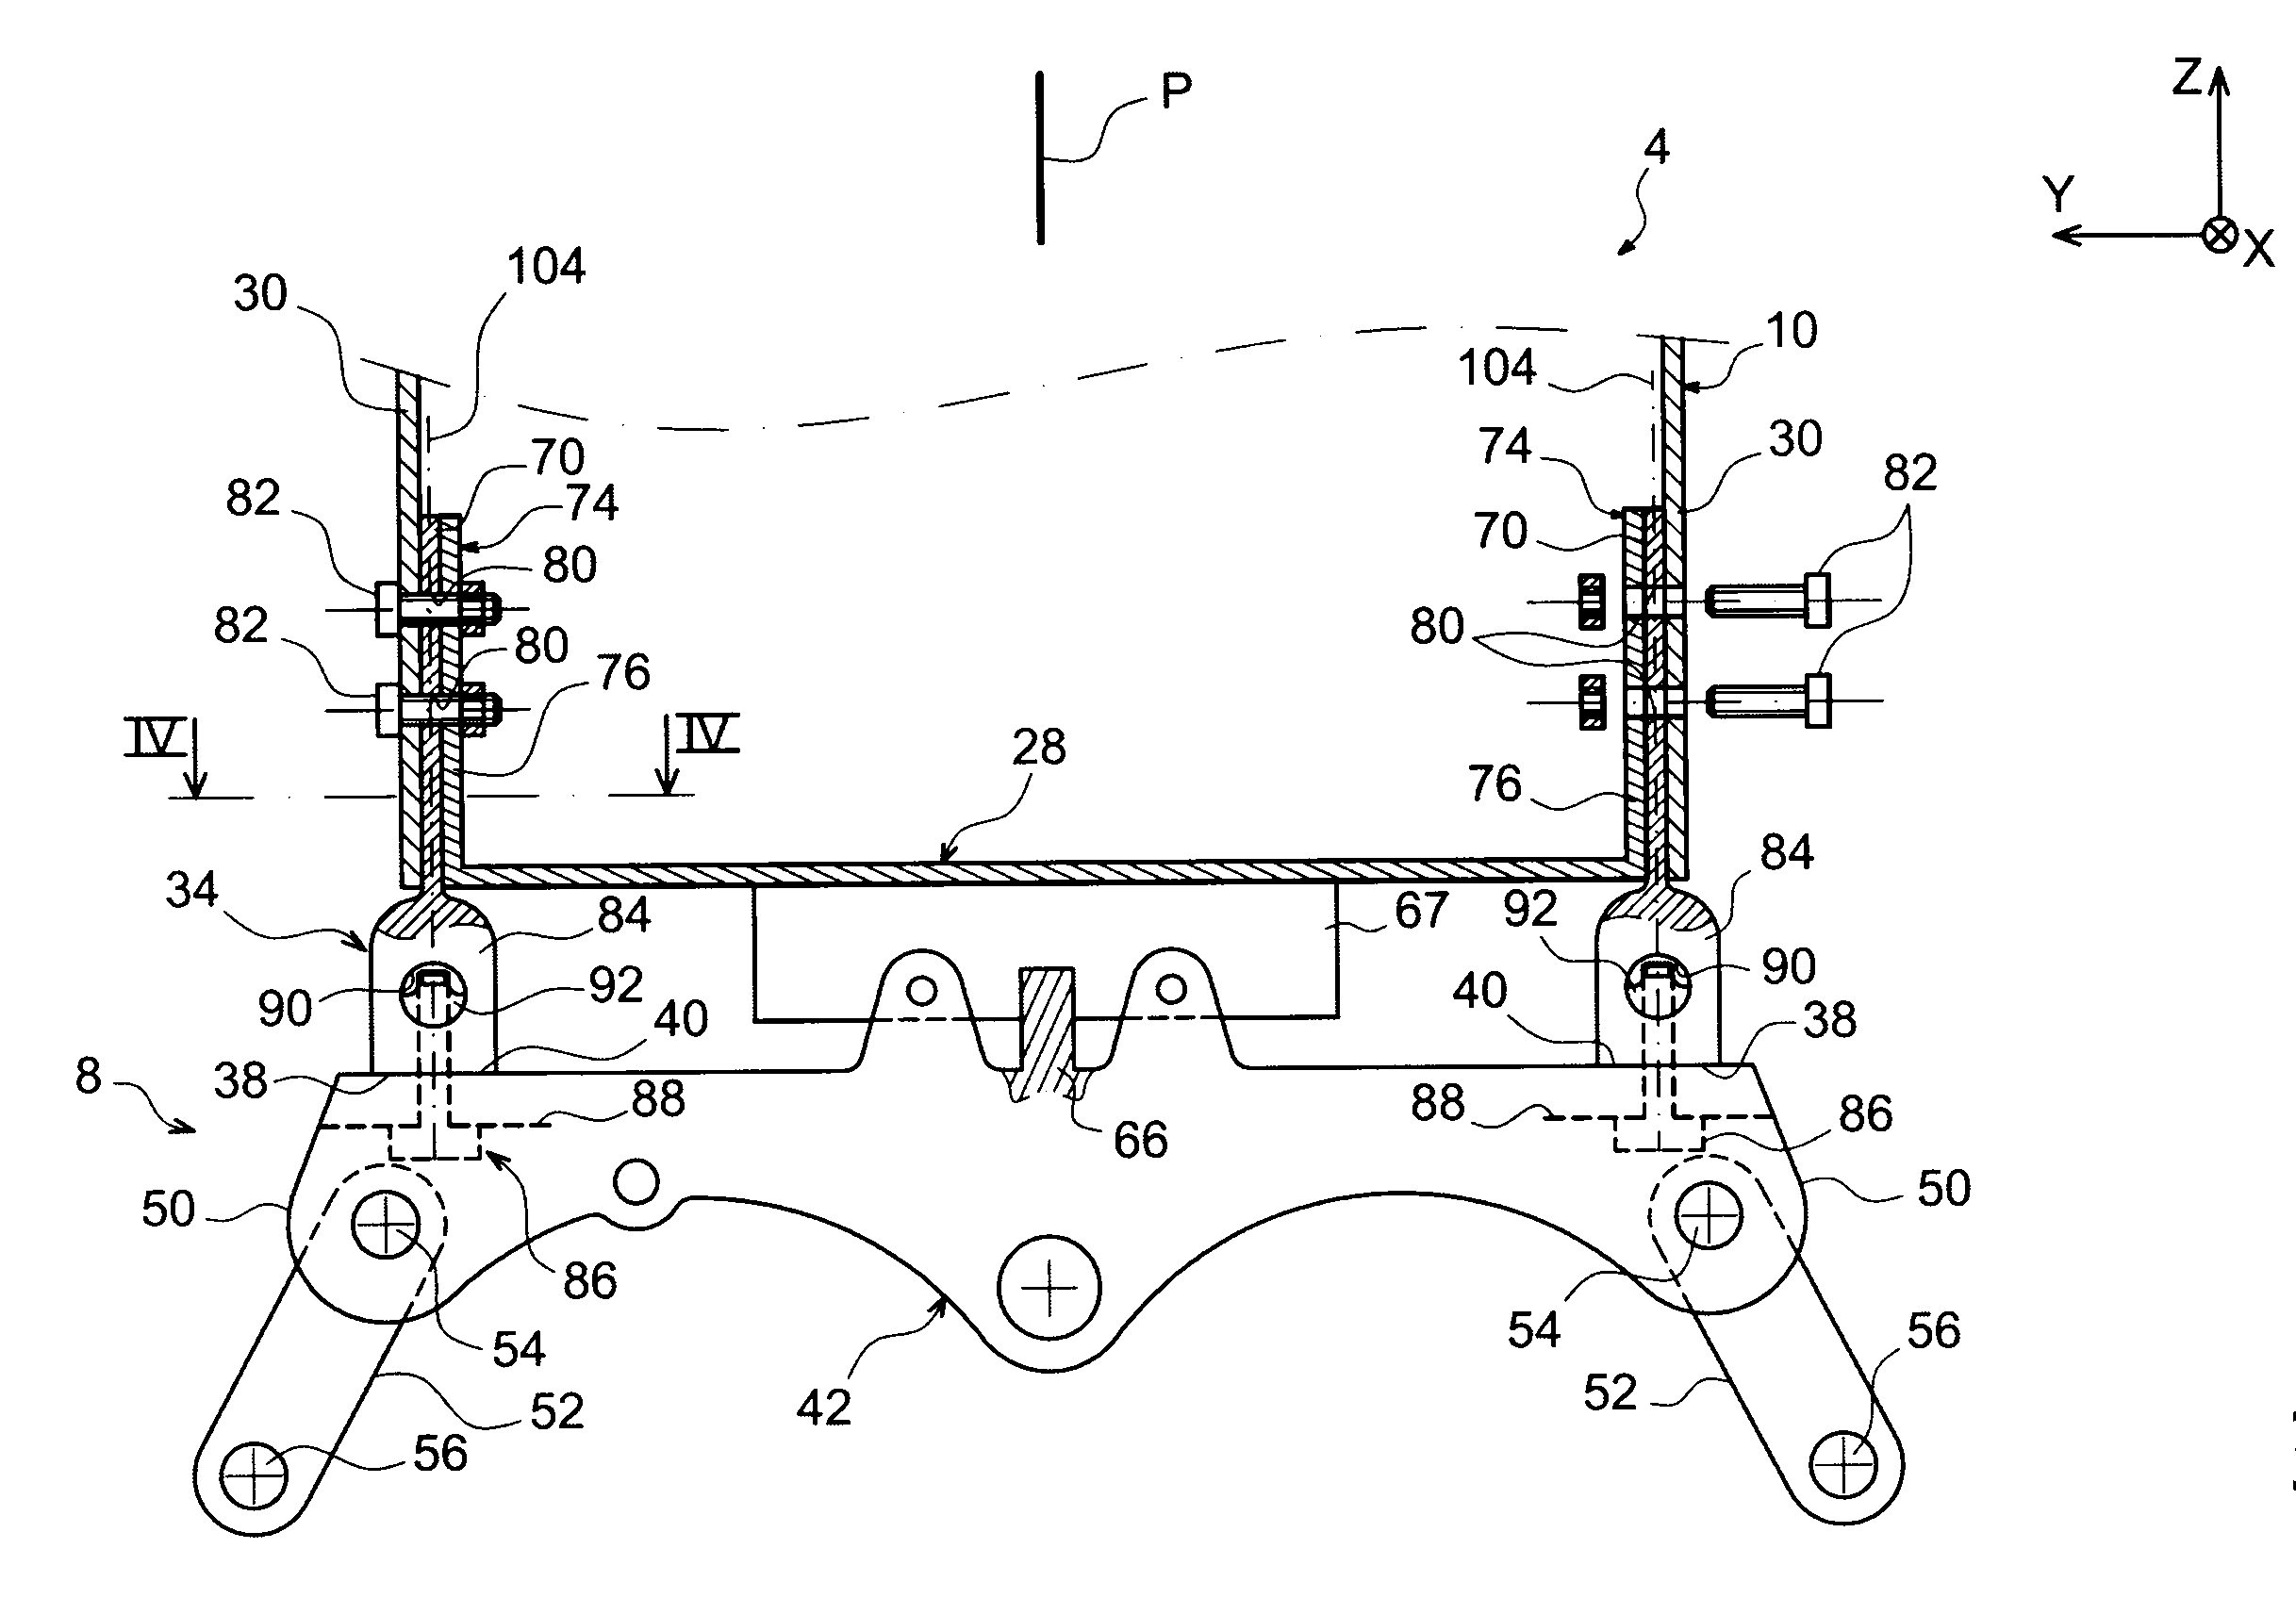 Aircraft engine attachment pylon having a rear engine attachment provided with a self-locking nut